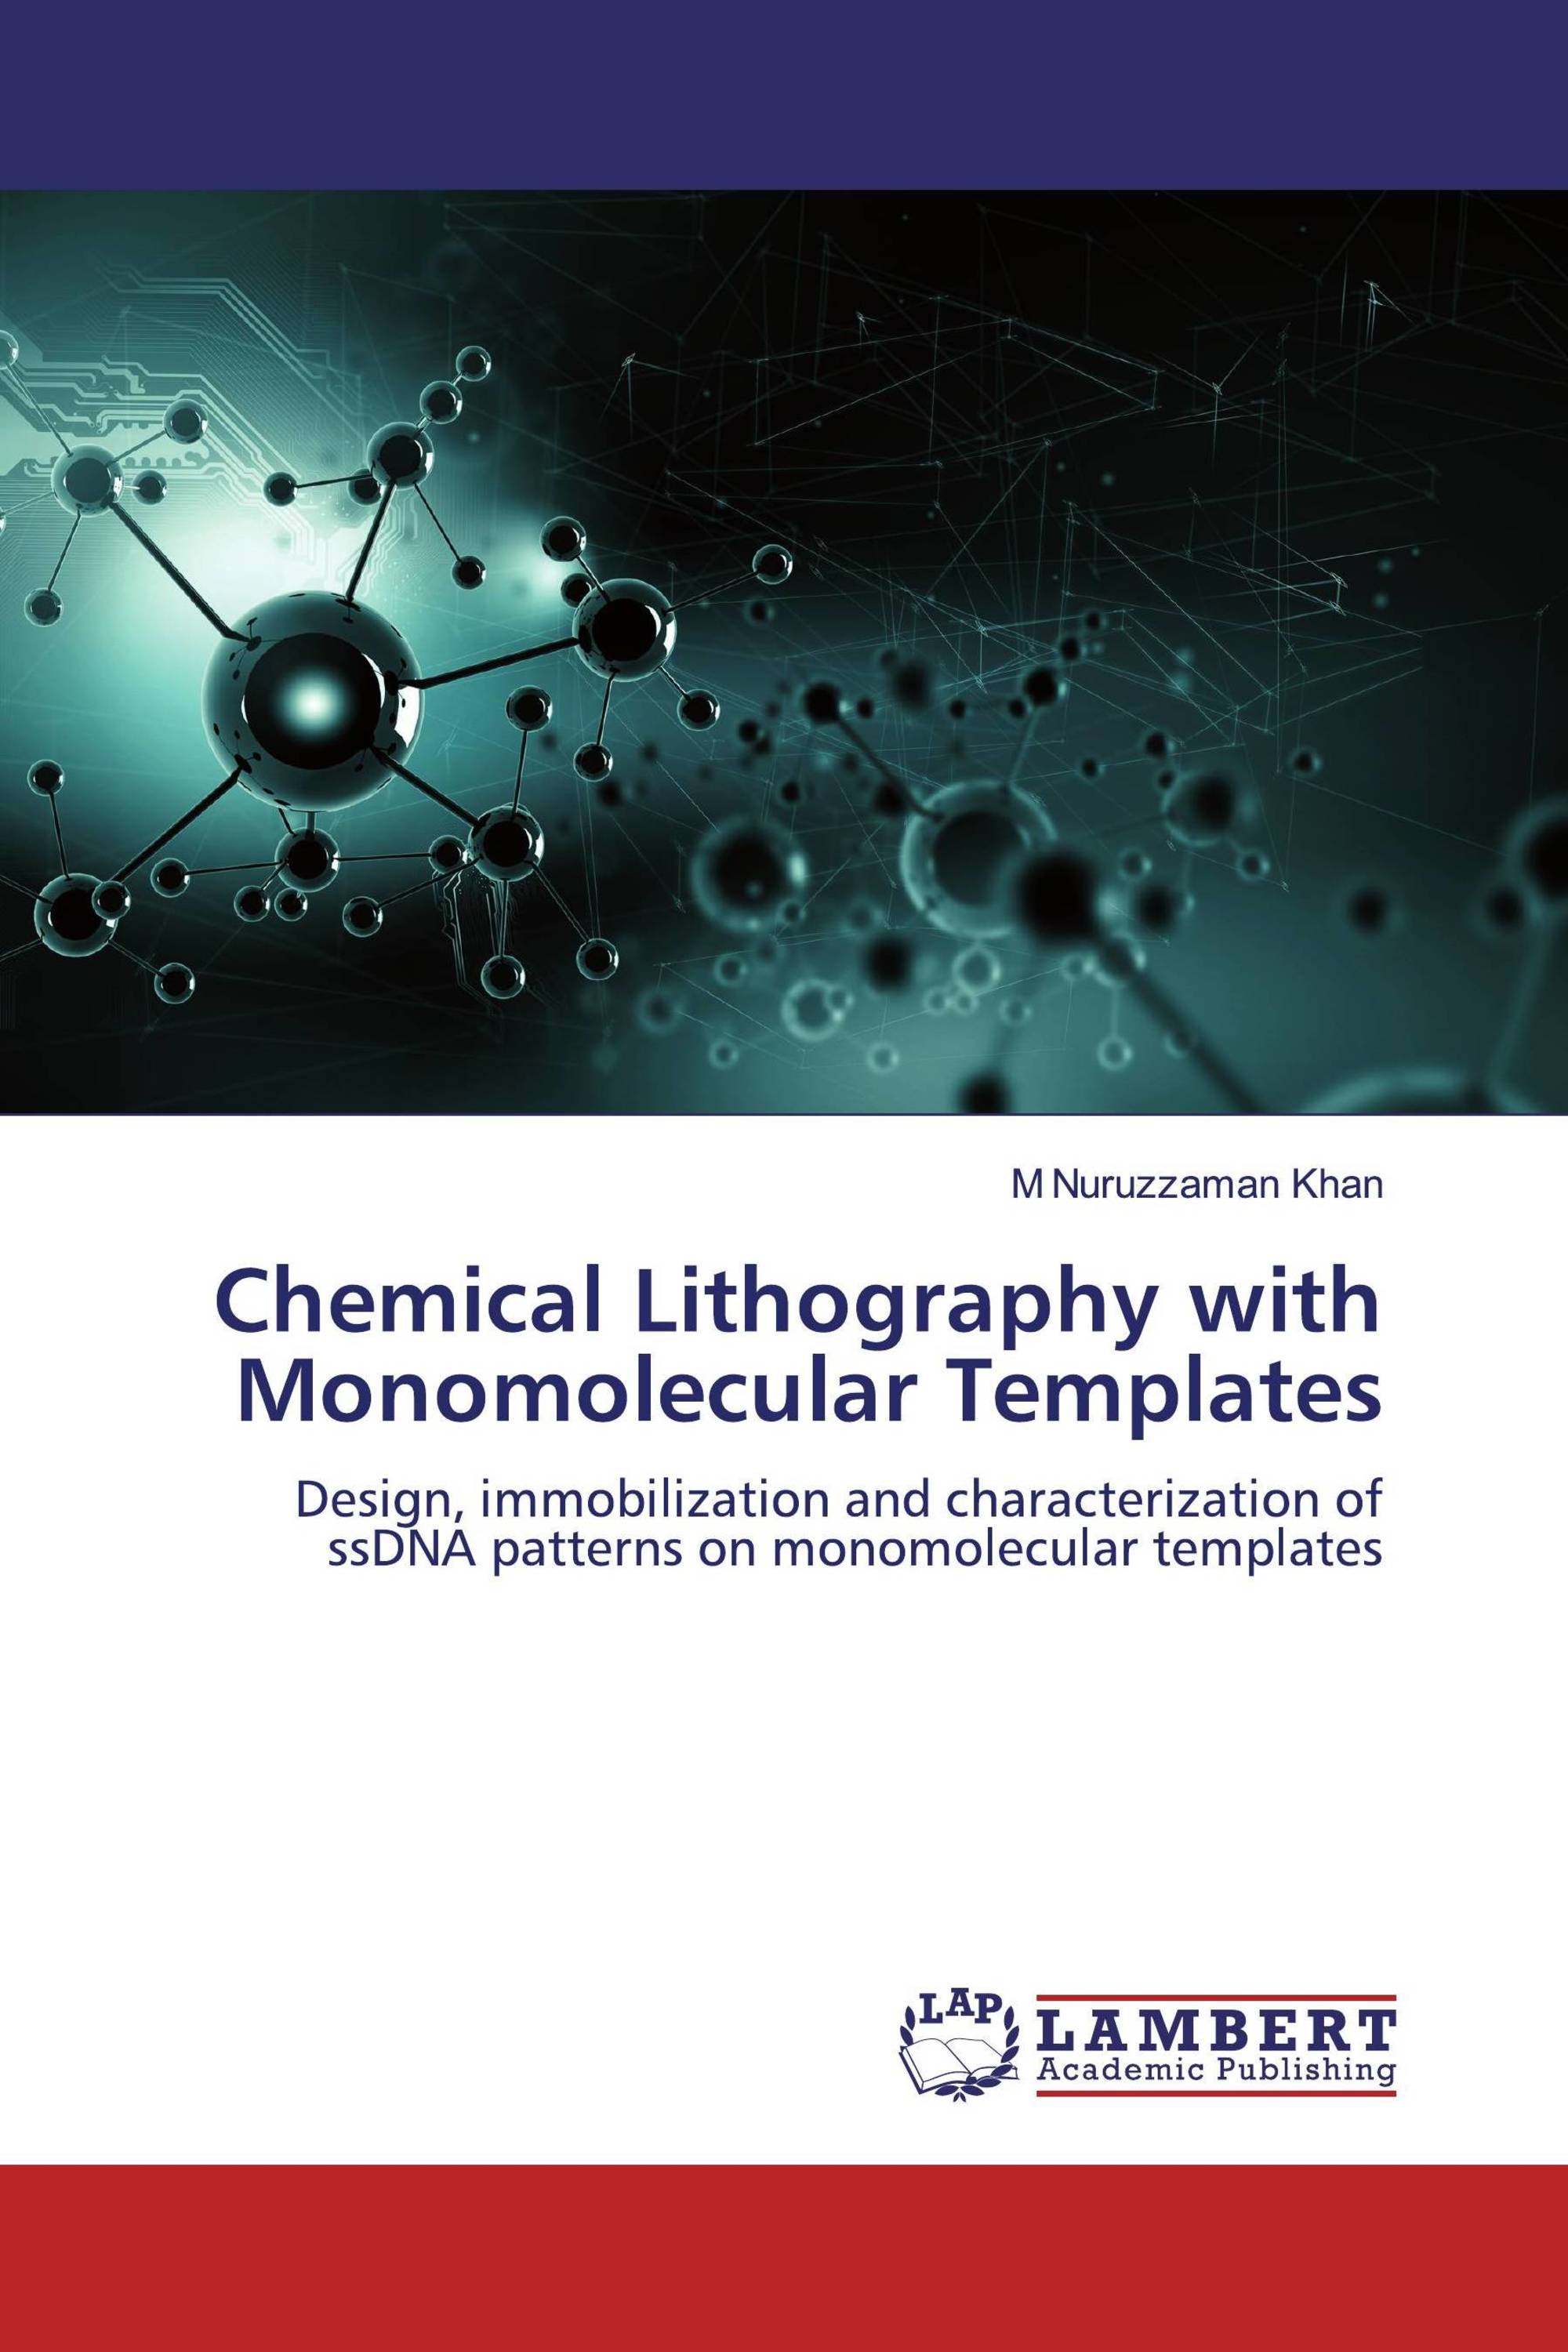 Chemical Lithography with Monomolecular Templates